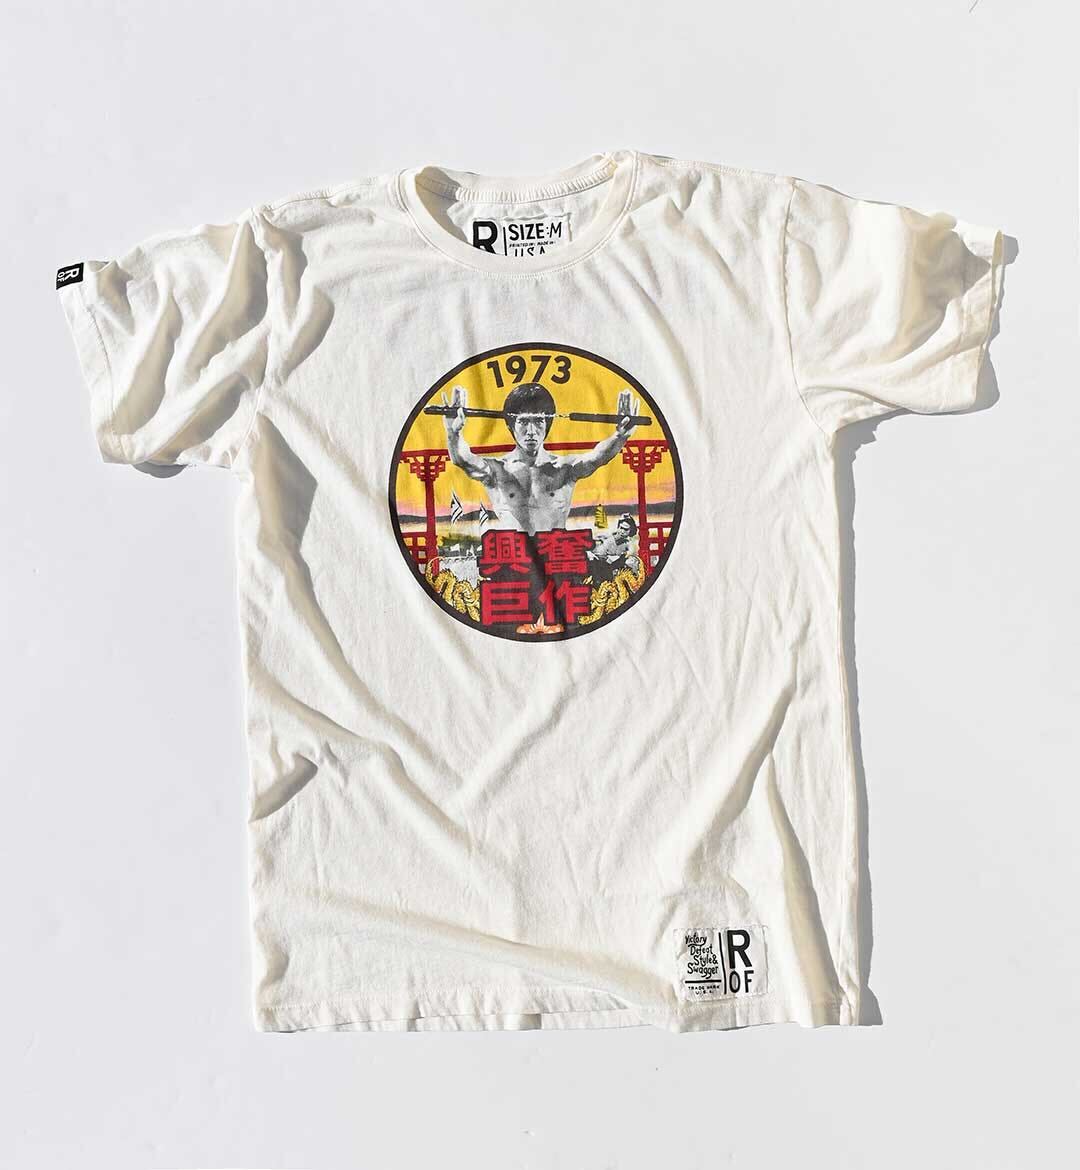 Bruce Lee Little Dragon 1973 White Tee - Roots of Fight Canada